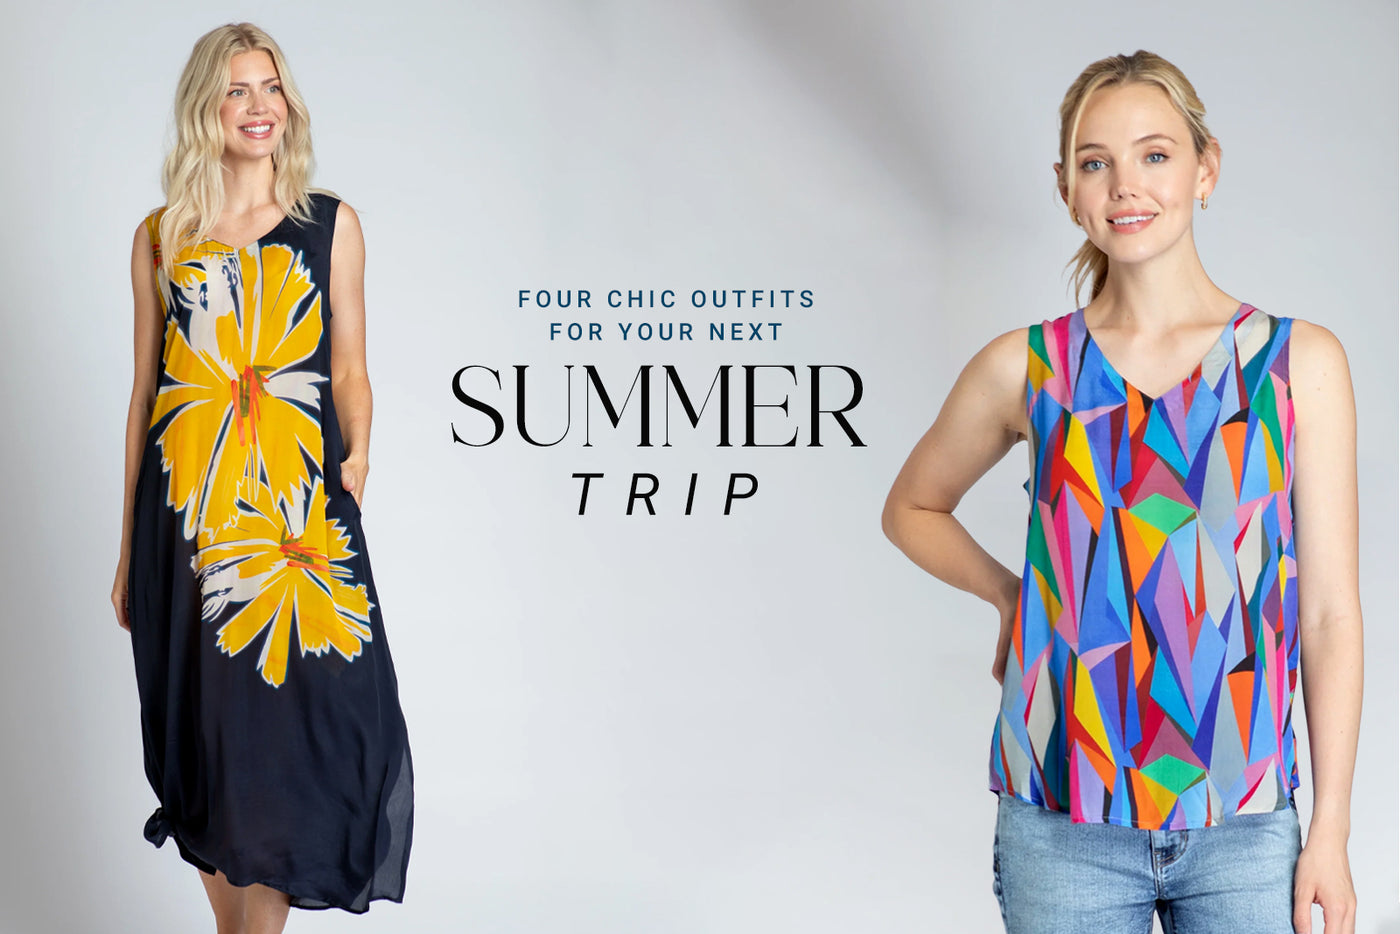 Chic Summer Outfits by Apny Apparel: Four Stylish Looks